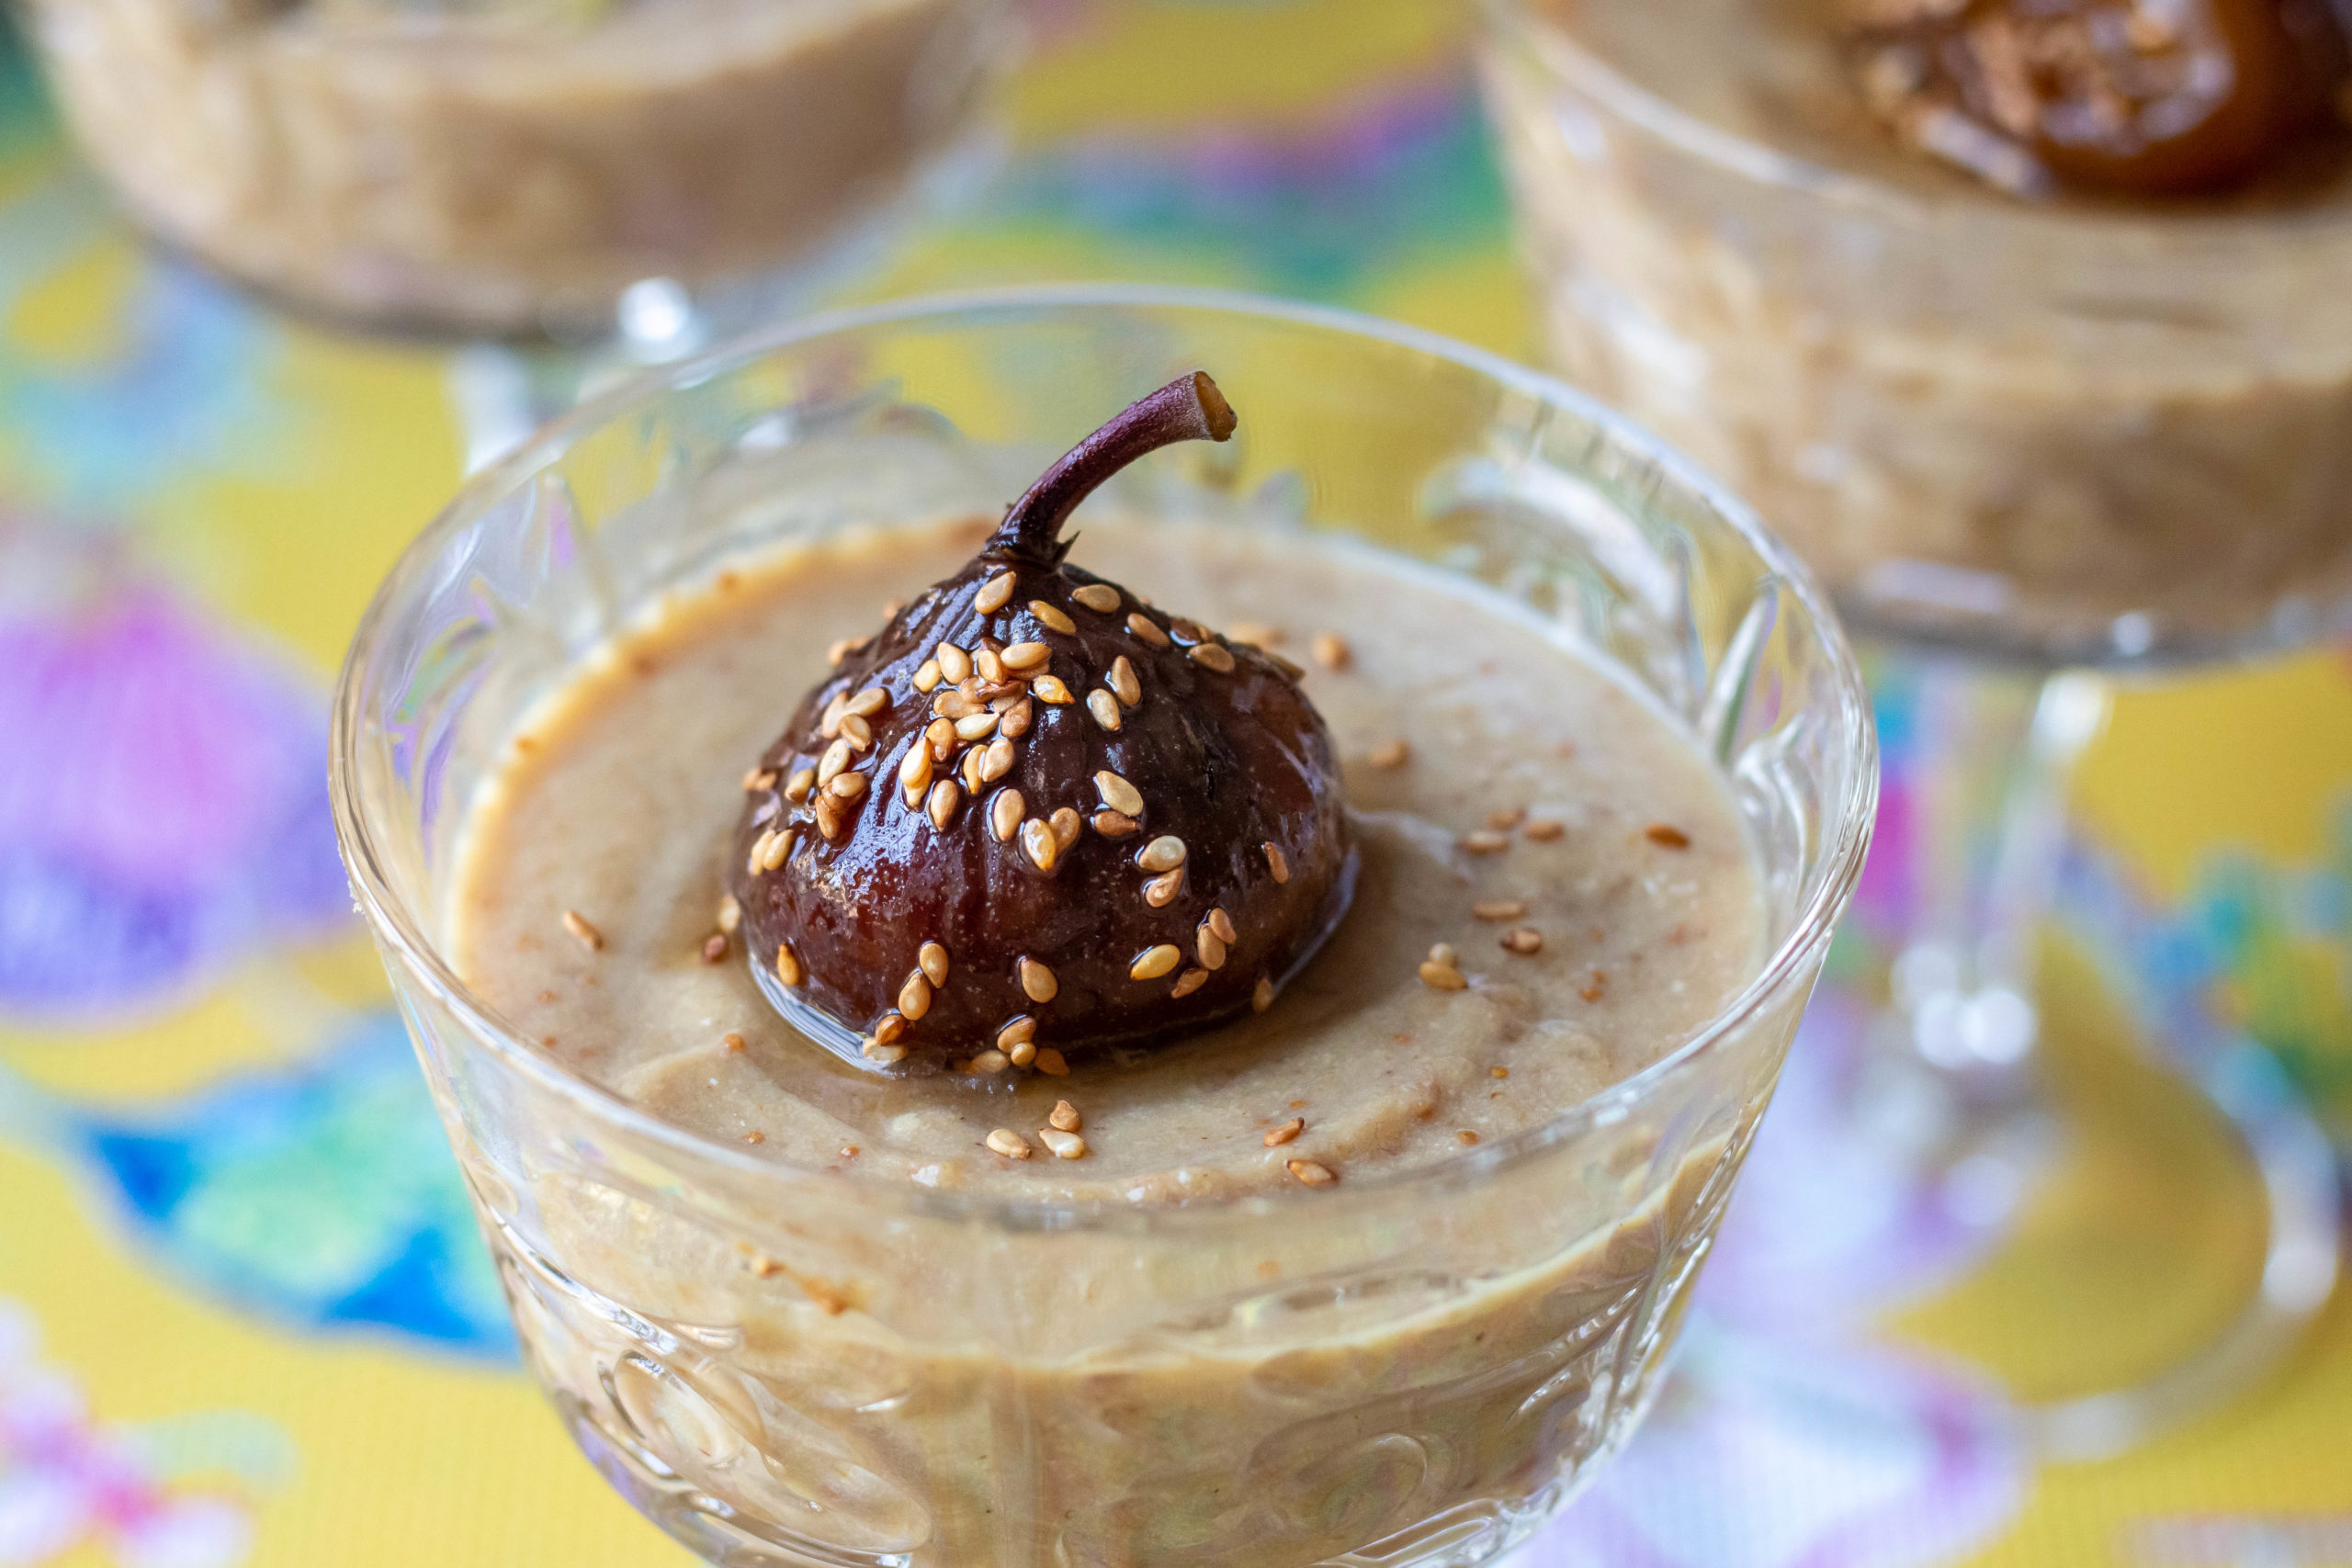 Dried fig malabi (milk pudding) in a glass on a colorful tablecloth